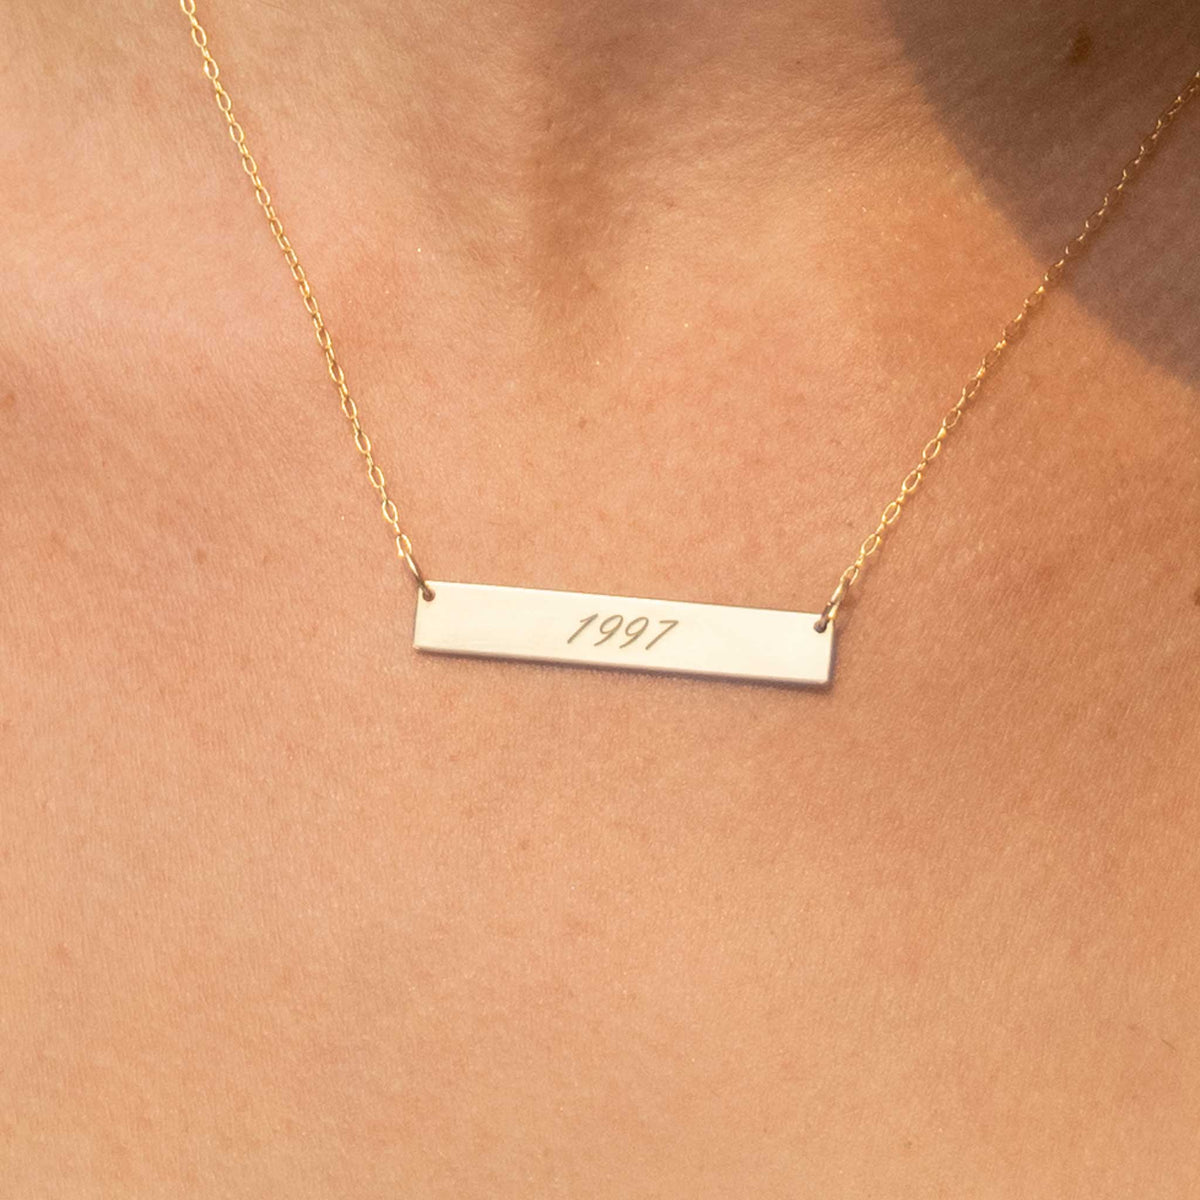 A close up of the rectangle necklace being worn. The neckace has 1997 engraved in a script font. 